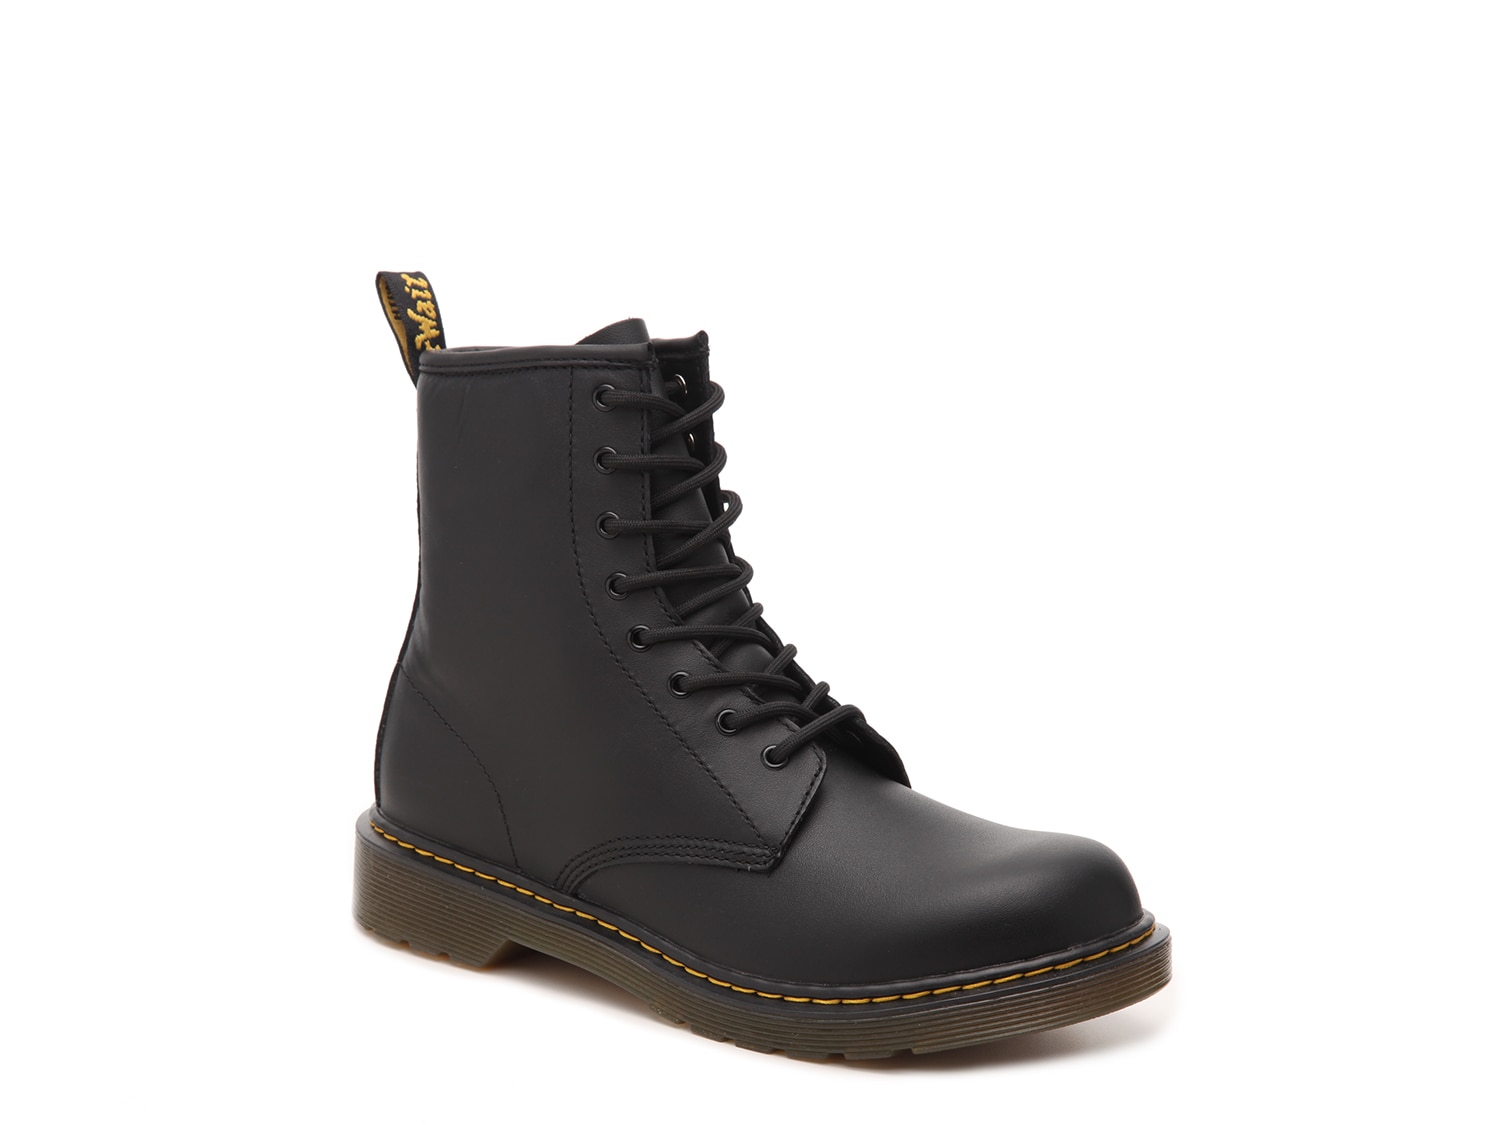 youth black combat boots